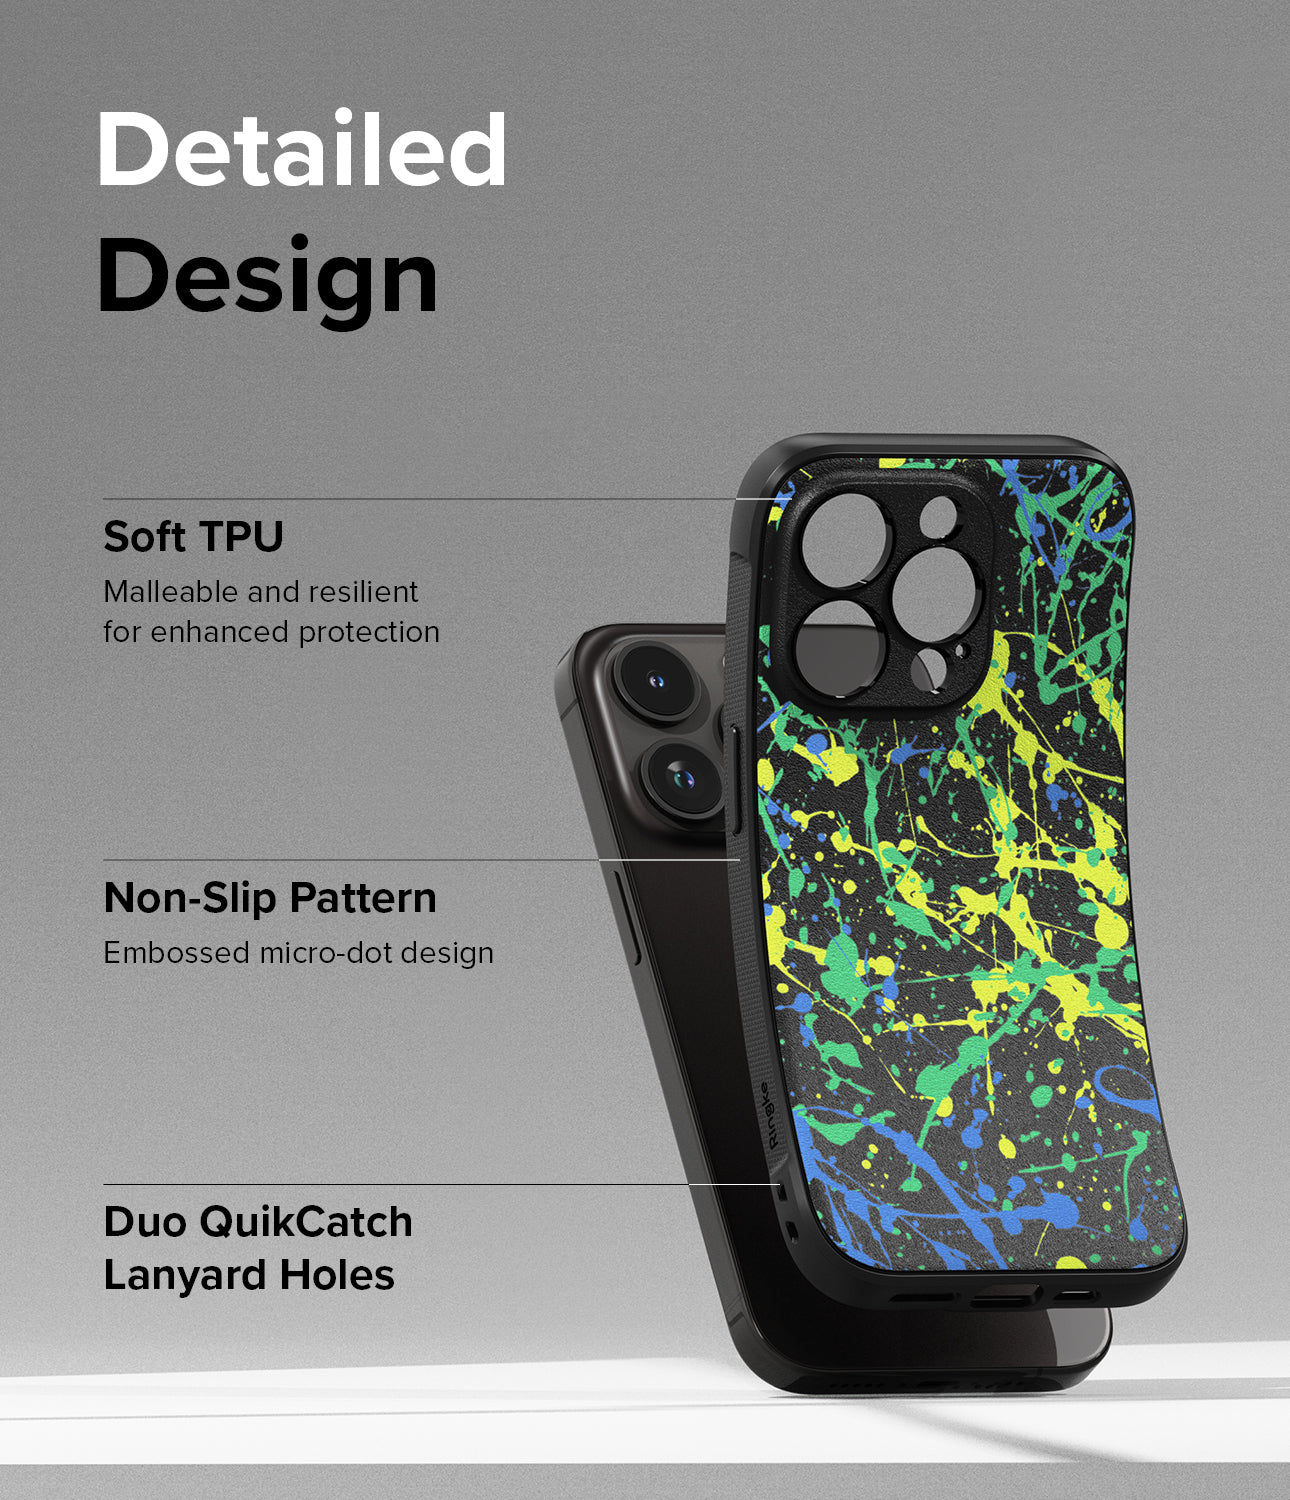 iPhone 15 Pro Case | Onyx Design - Action Painting - Detailed Design. Malleable and resilient for enhanced protection with Soft TPU. Embossed micro-dot design with Non-Slip Pattern. Duo QuikCatch Lanyard Holes.